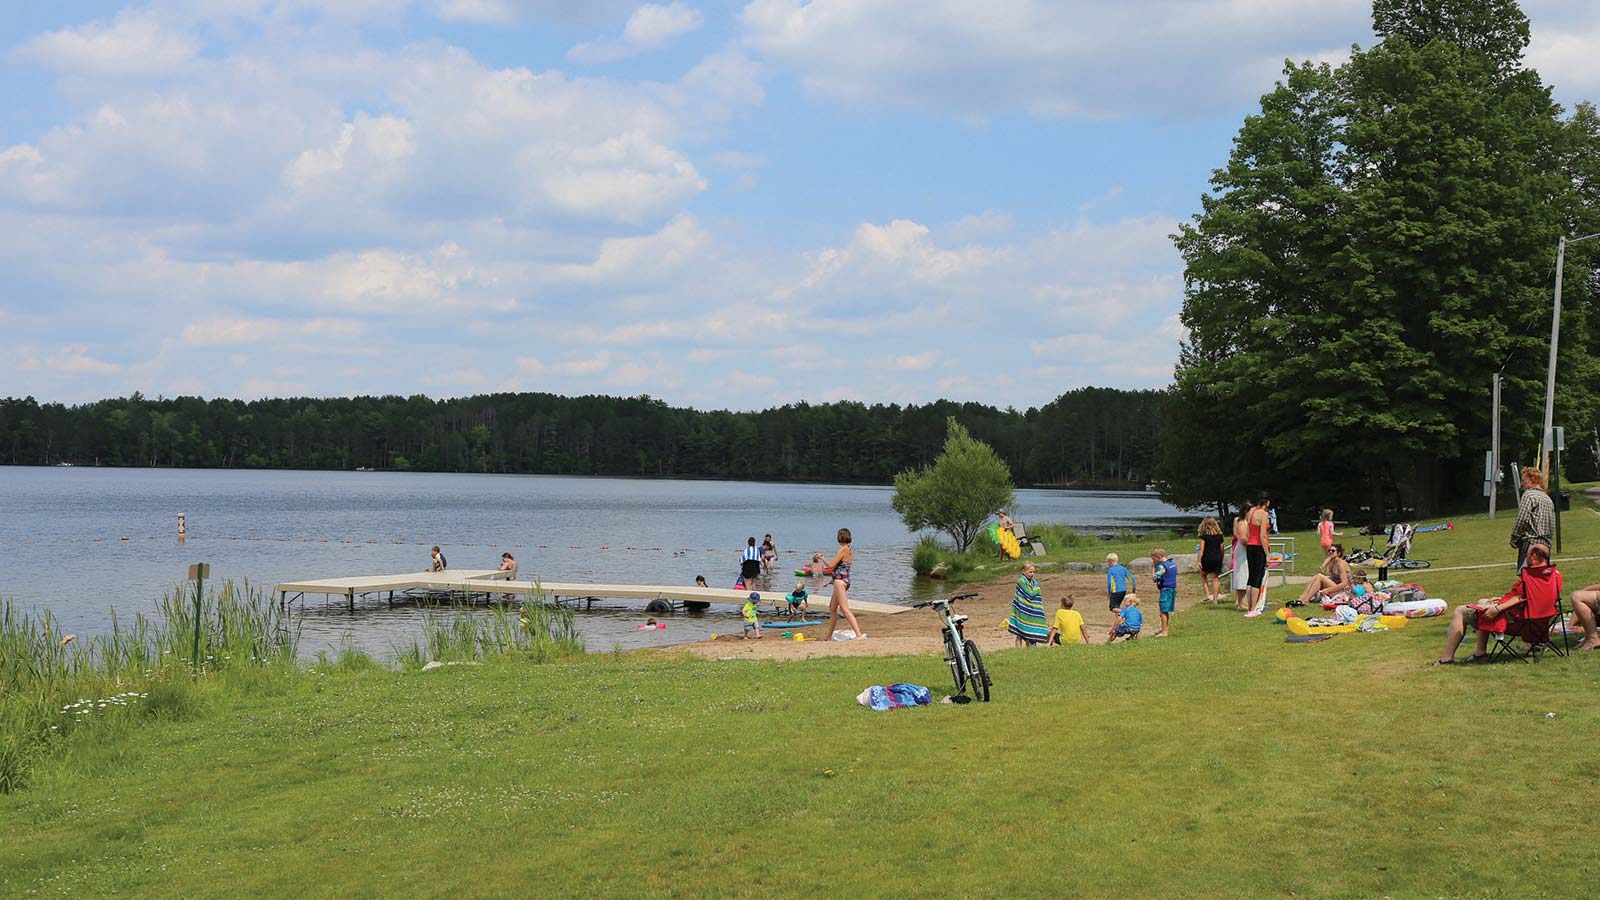 People enjoying the beach with a dock on a summer day